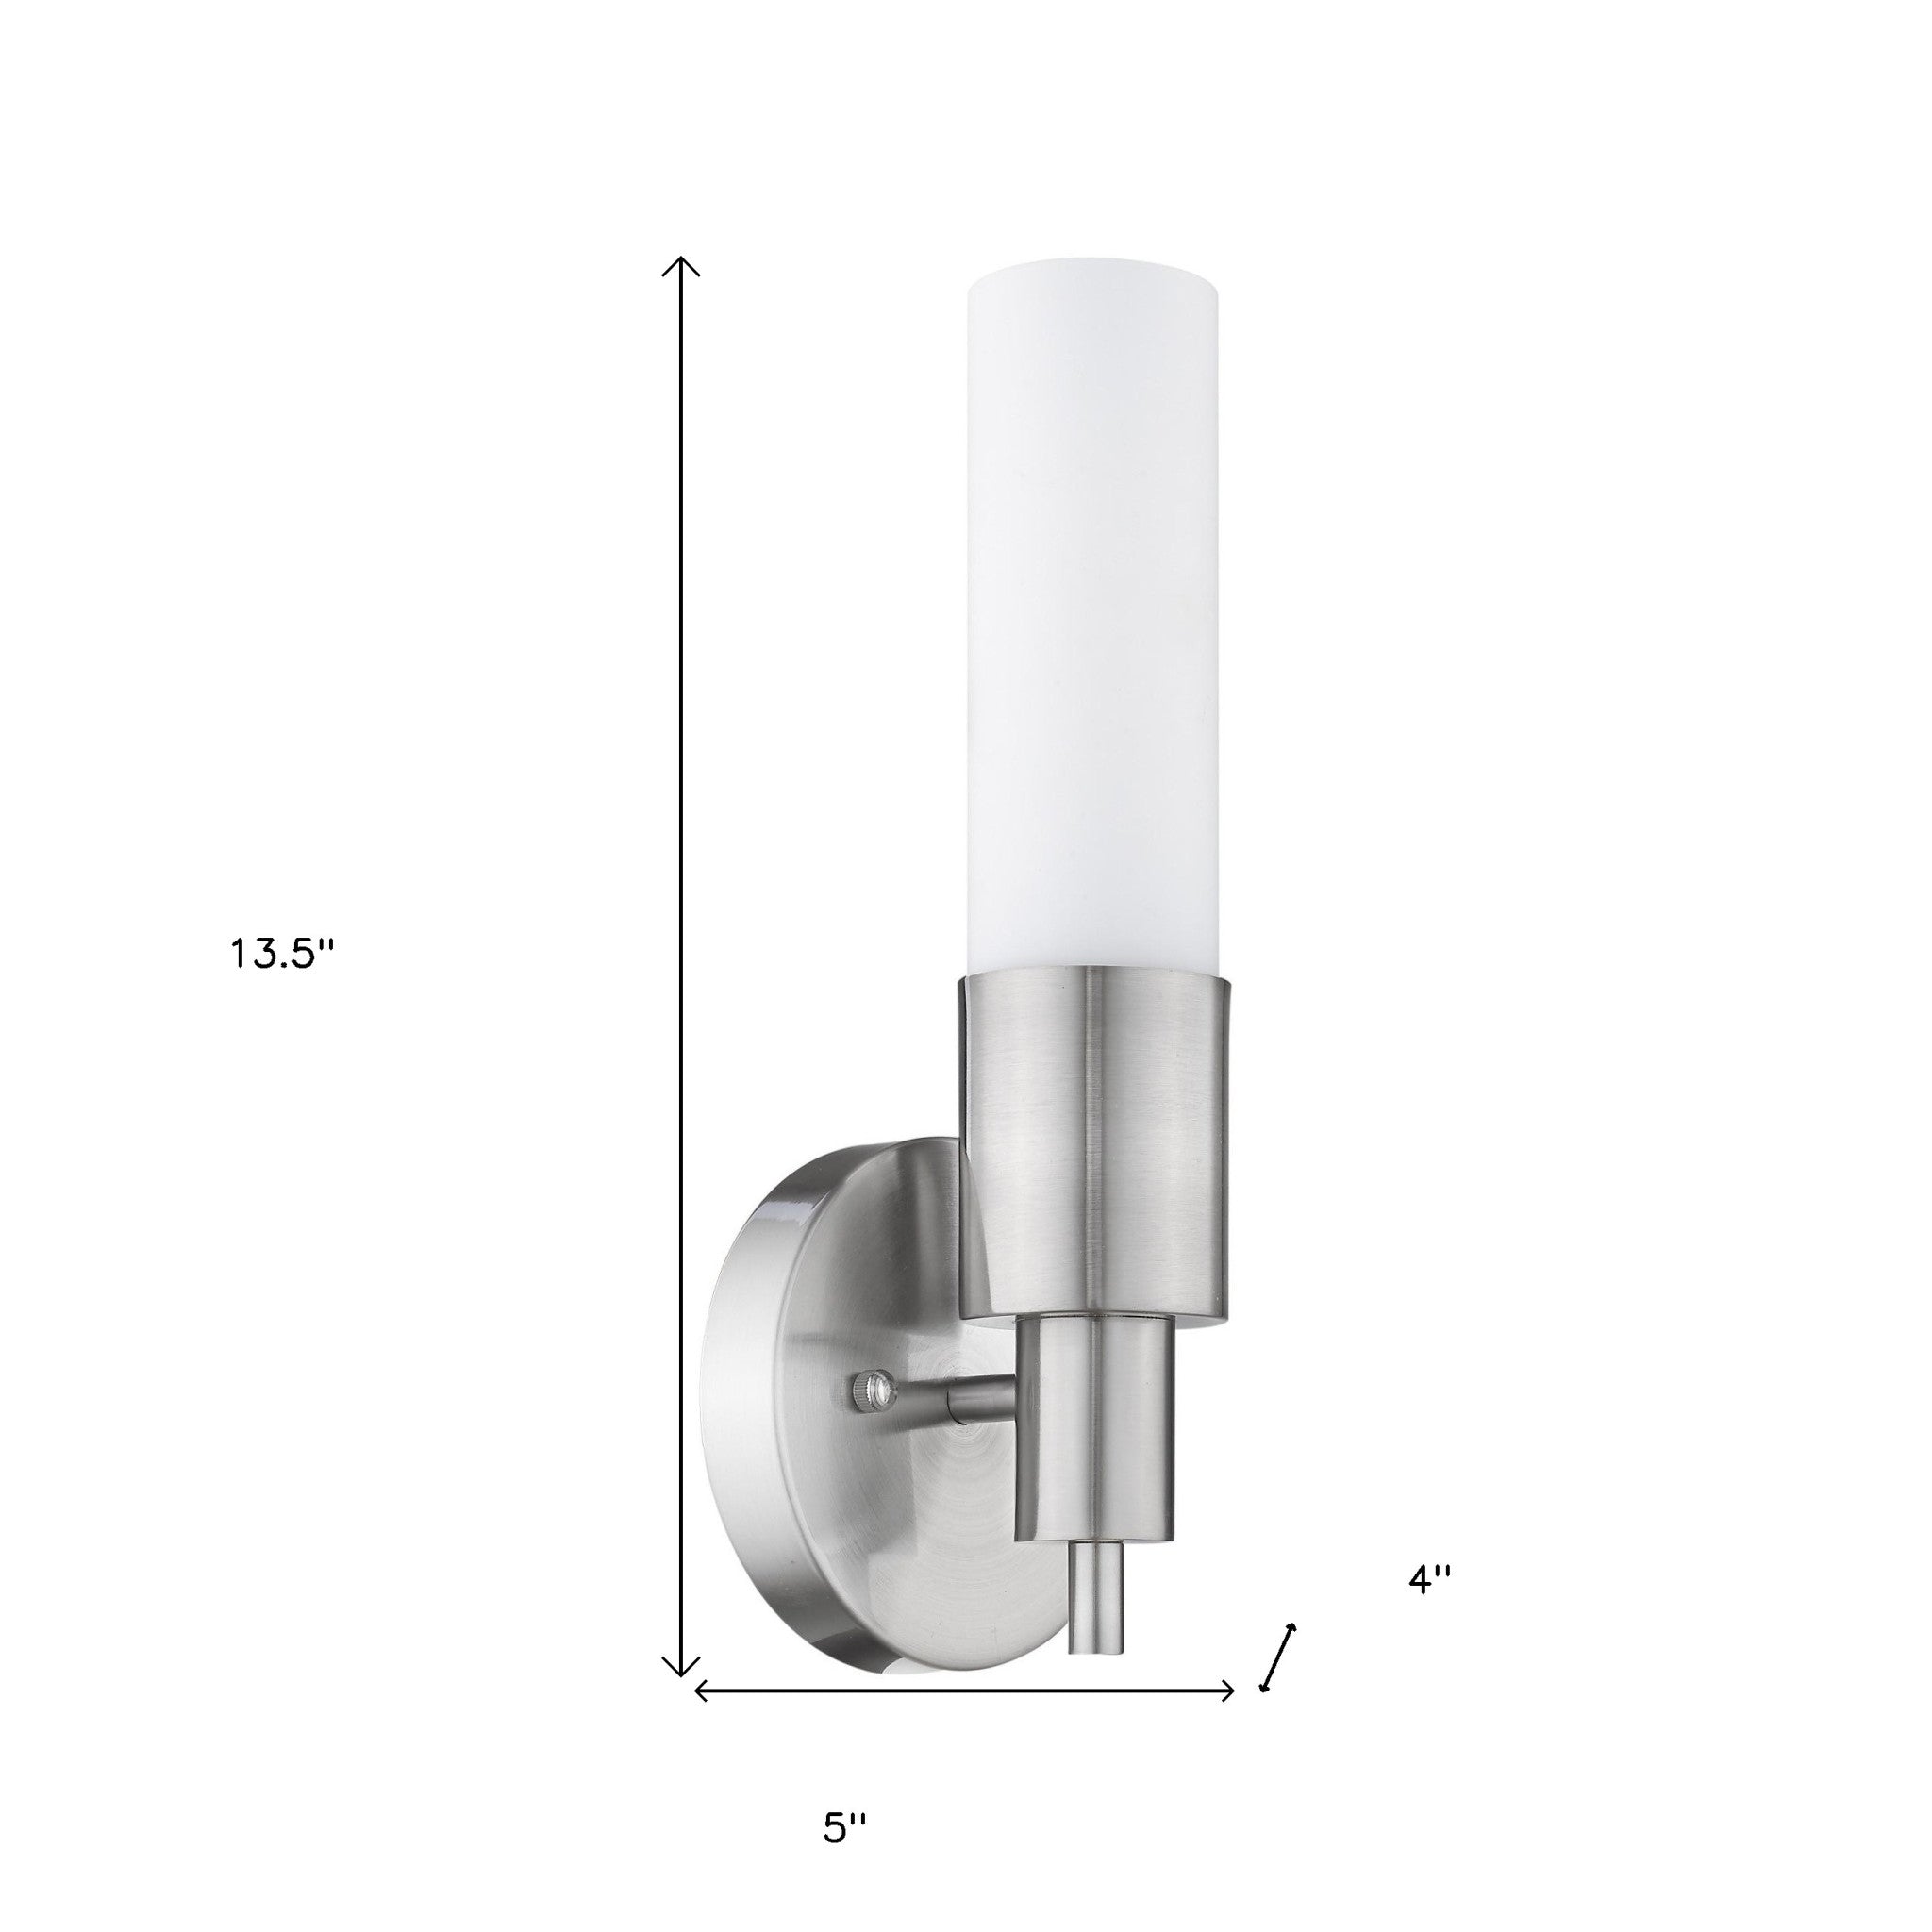 Silver Narrow Wall Light with Frosted Glass Shade